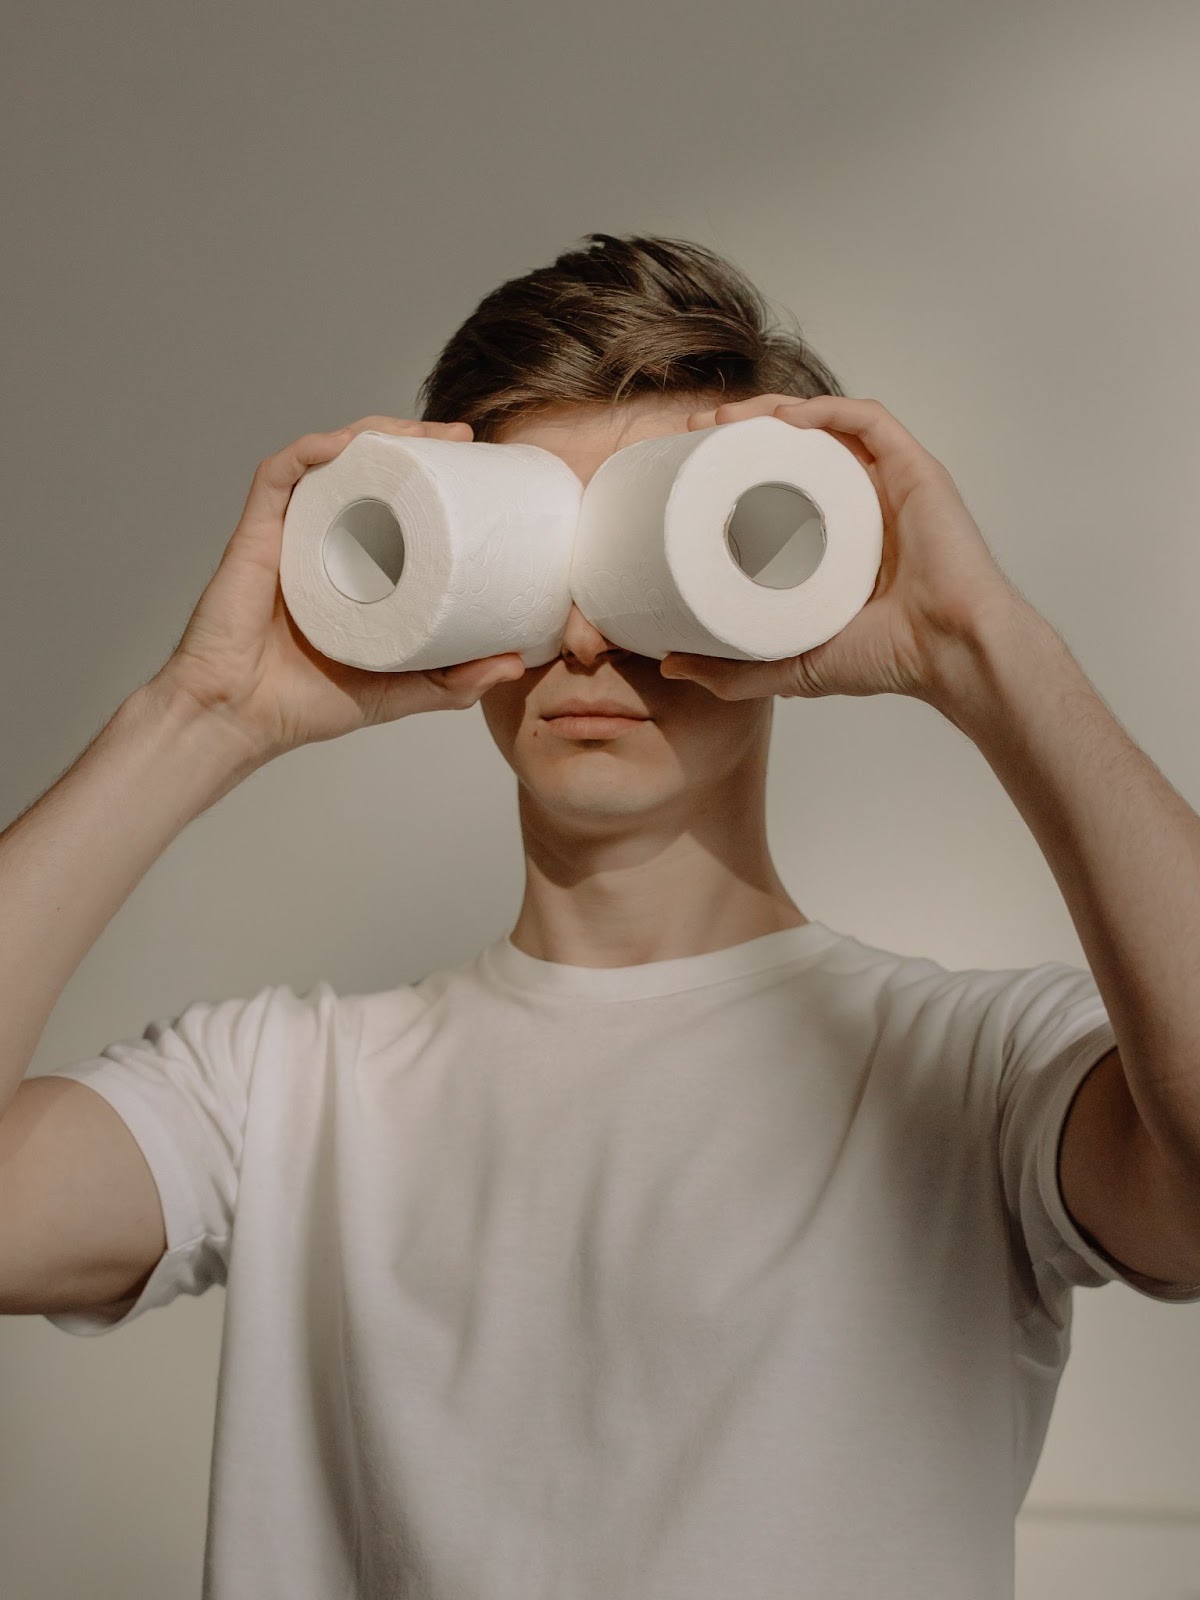 Guy holding two toilet papers against his eyes 